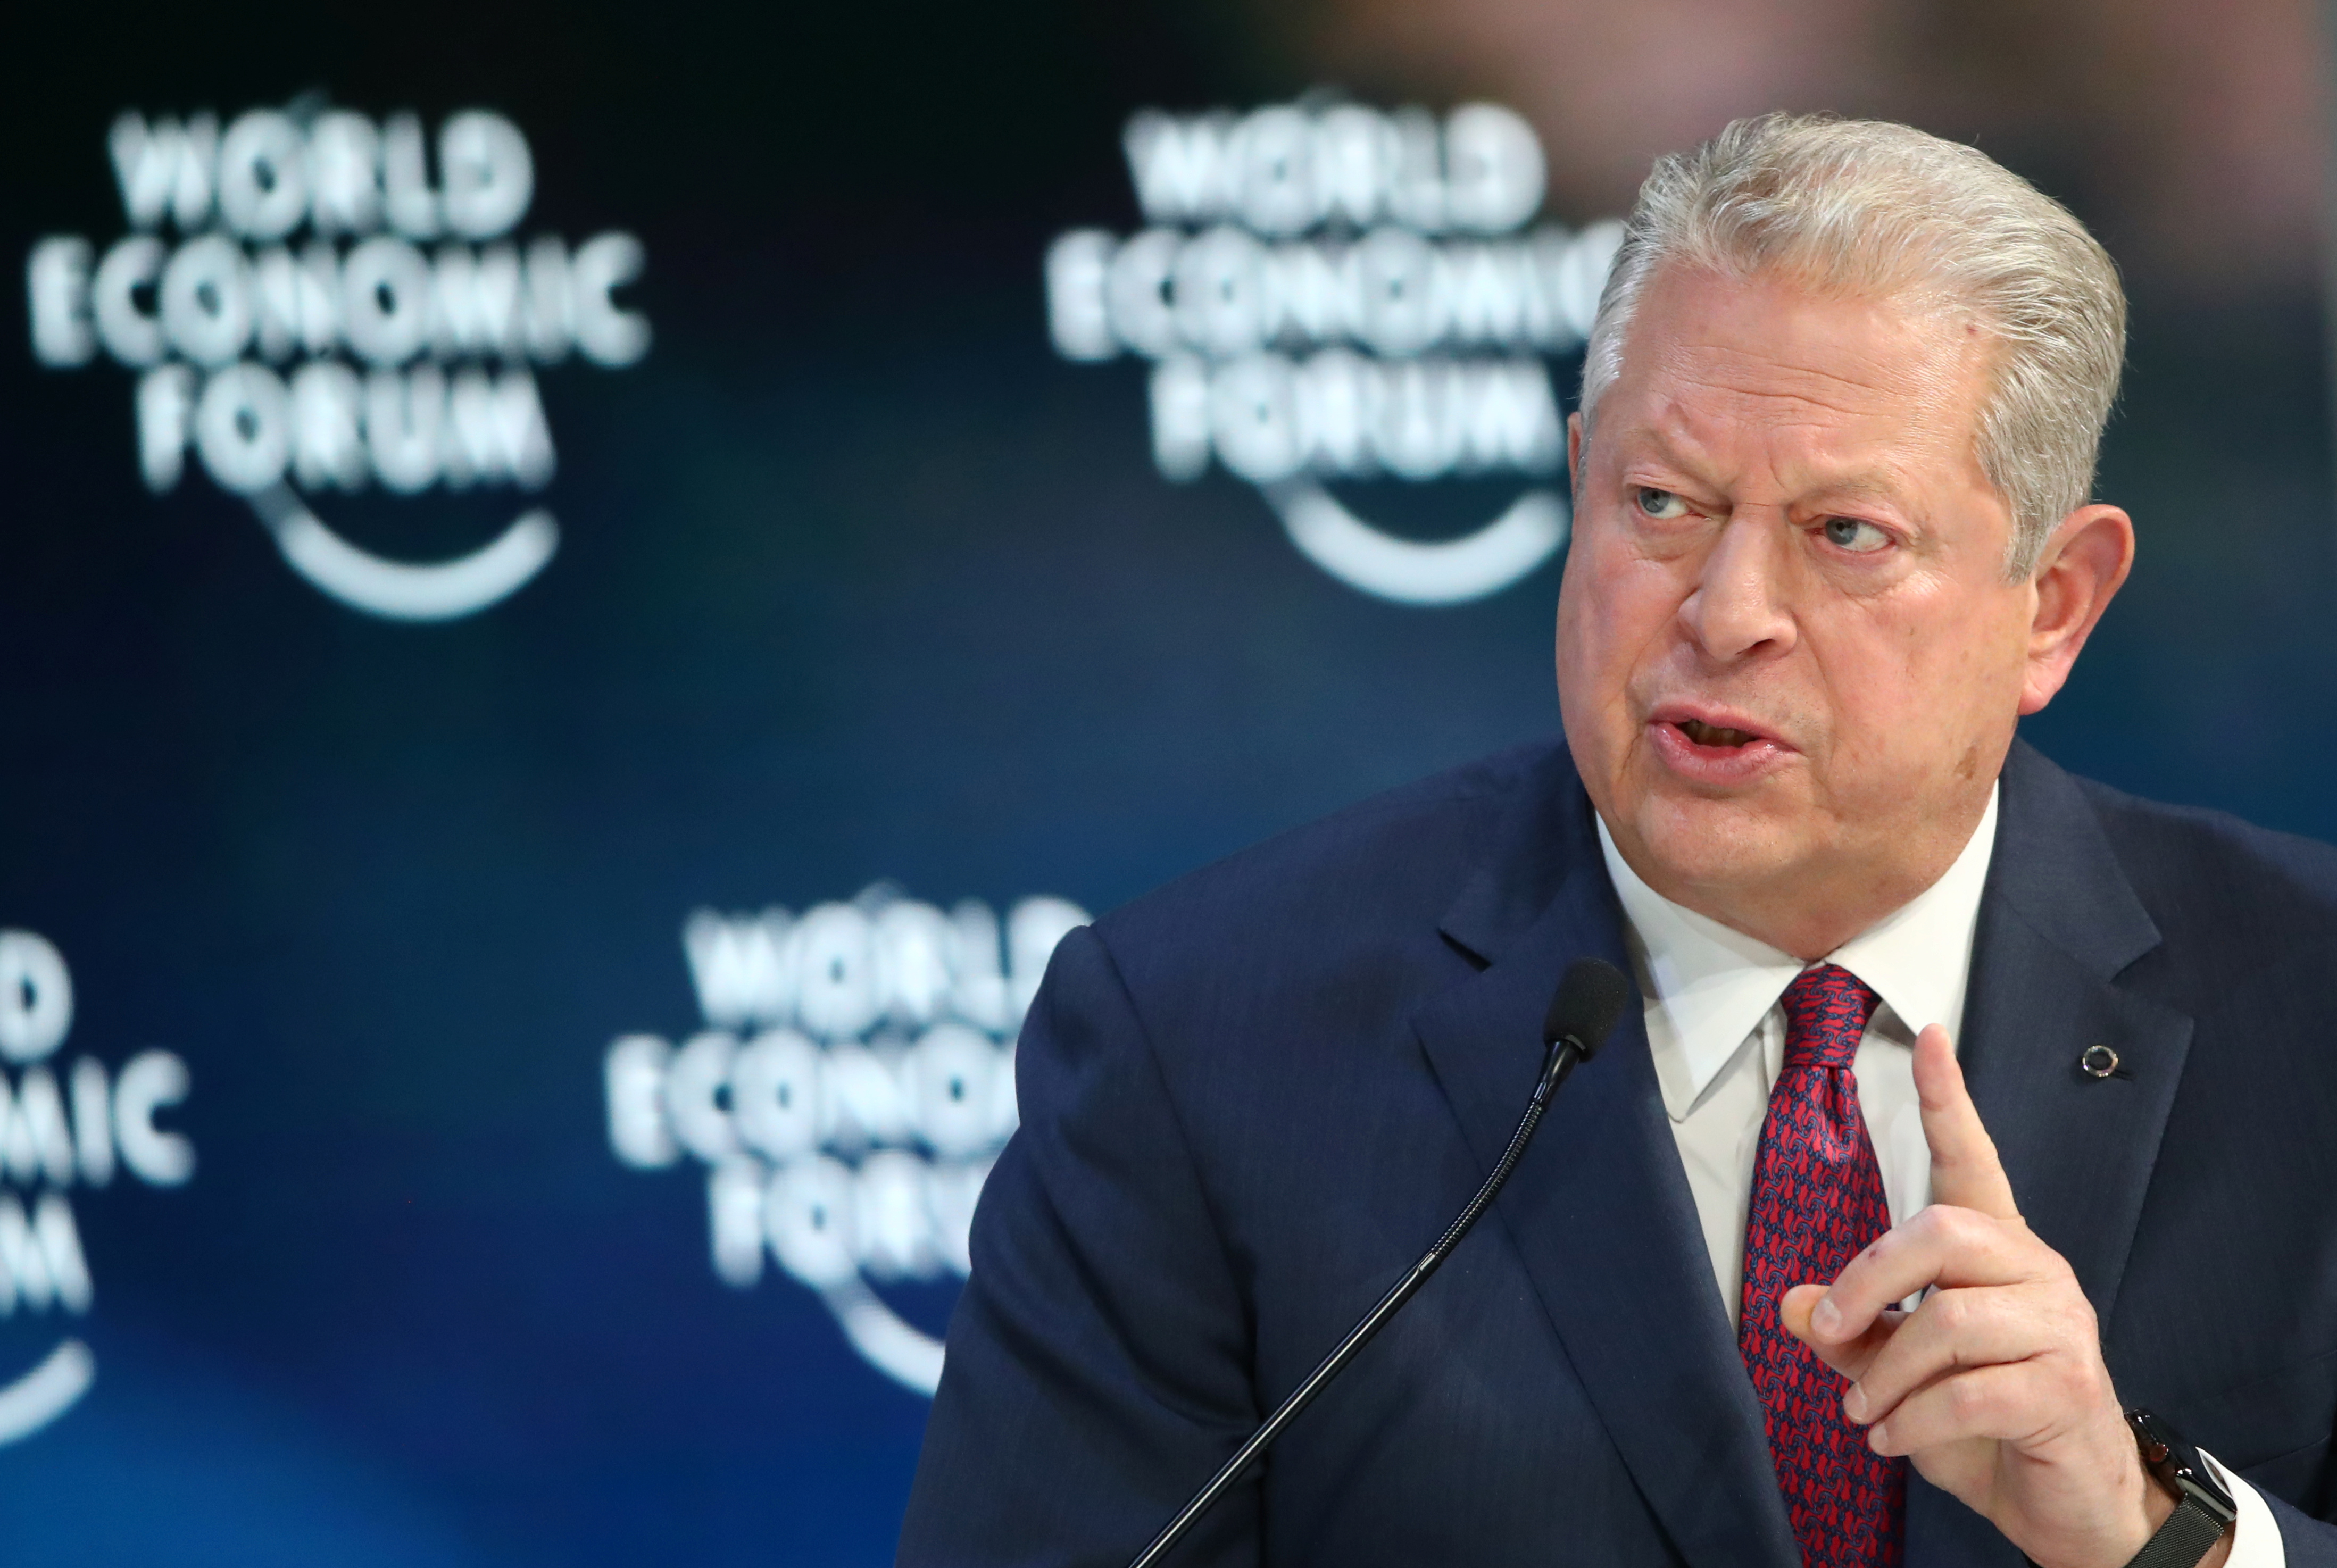 Former U.S. Vice-President Al Gore speaks during a session at the 50th World Economic Forum (WEF) annual meeting in Davos